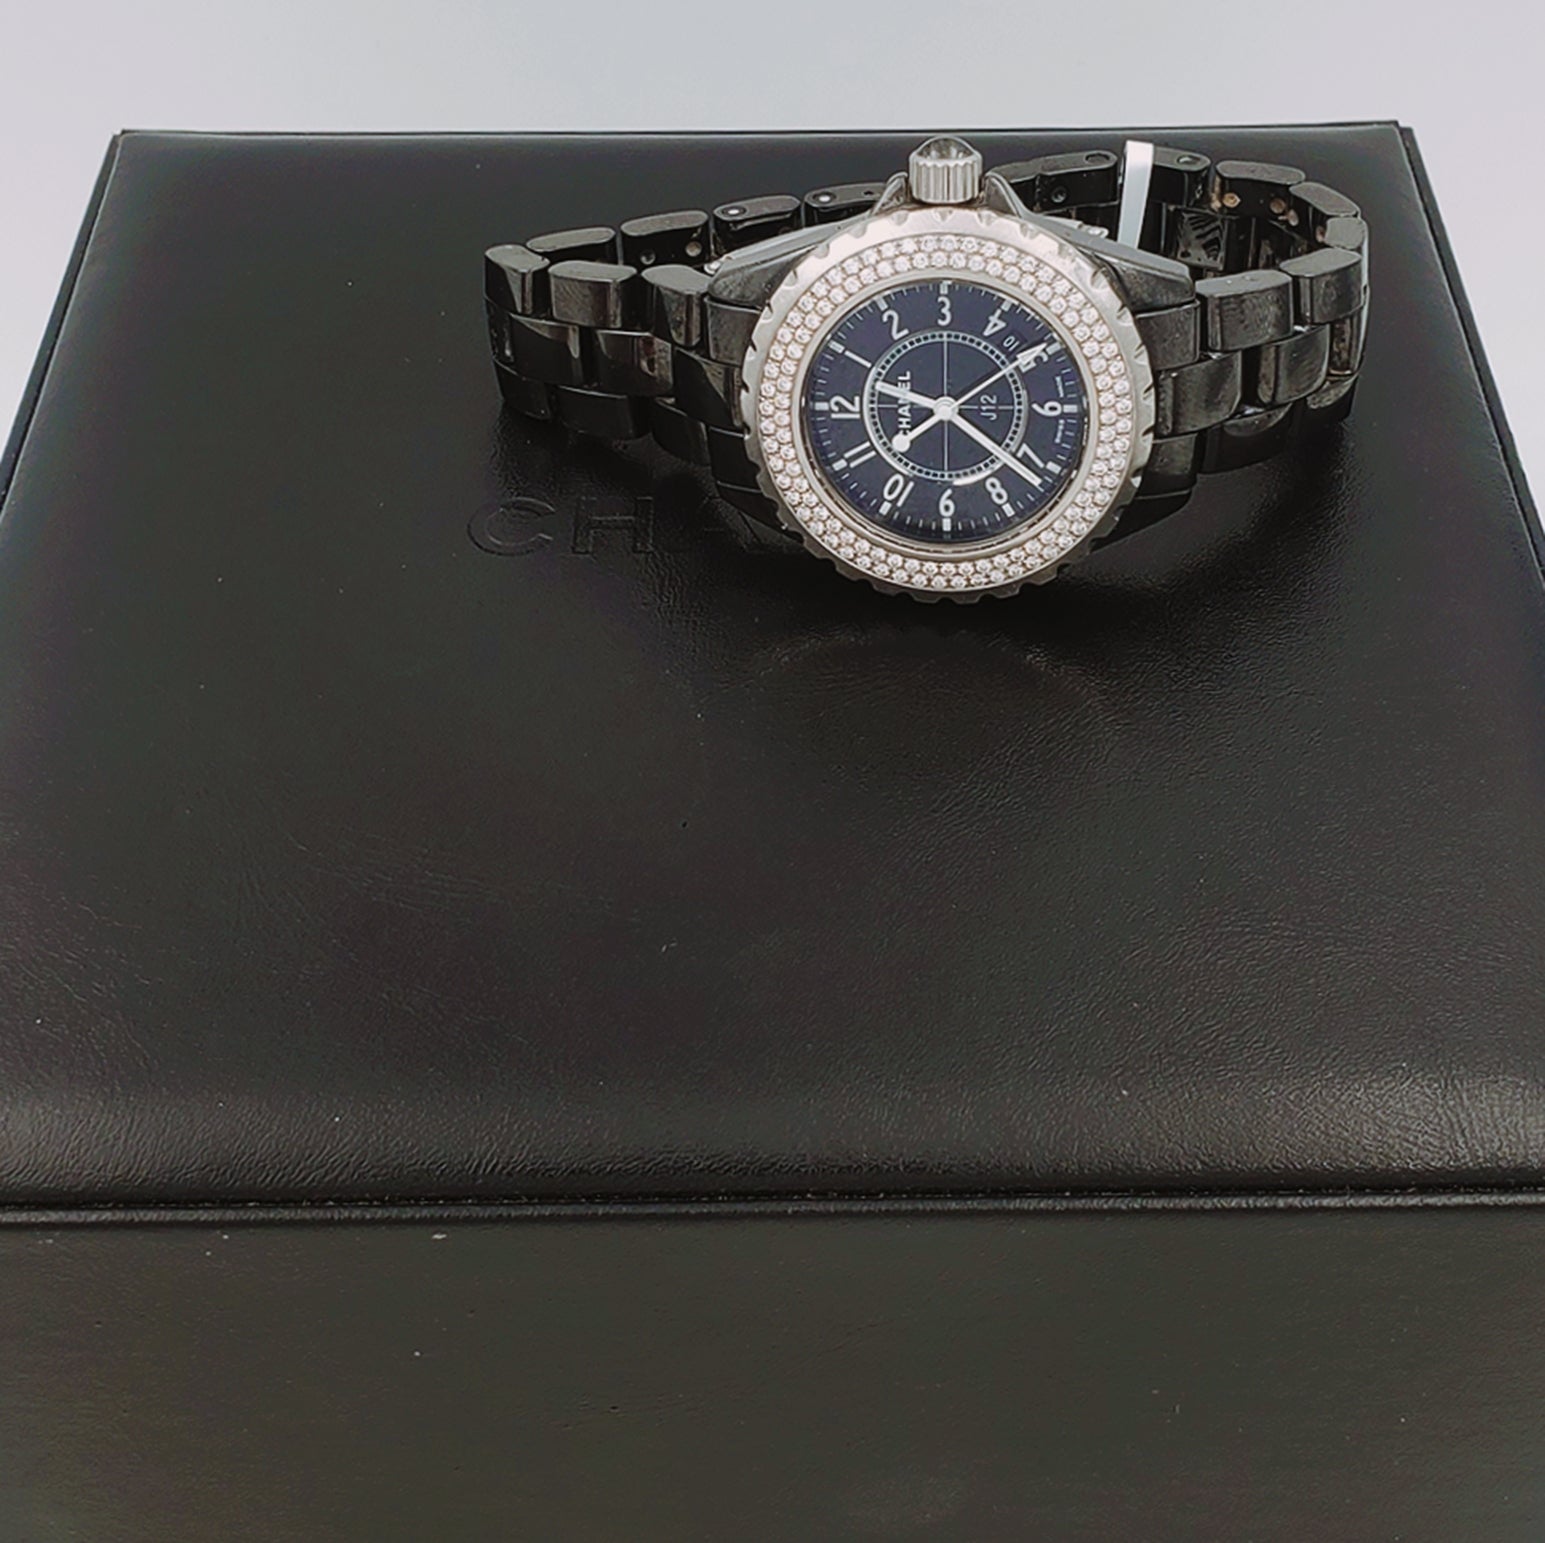 Ladies Chanel J12 - 33mm Black Ceramic Band Watch with High Precision Quartz Movement and Diamond Bezel. (Pre-Owned)